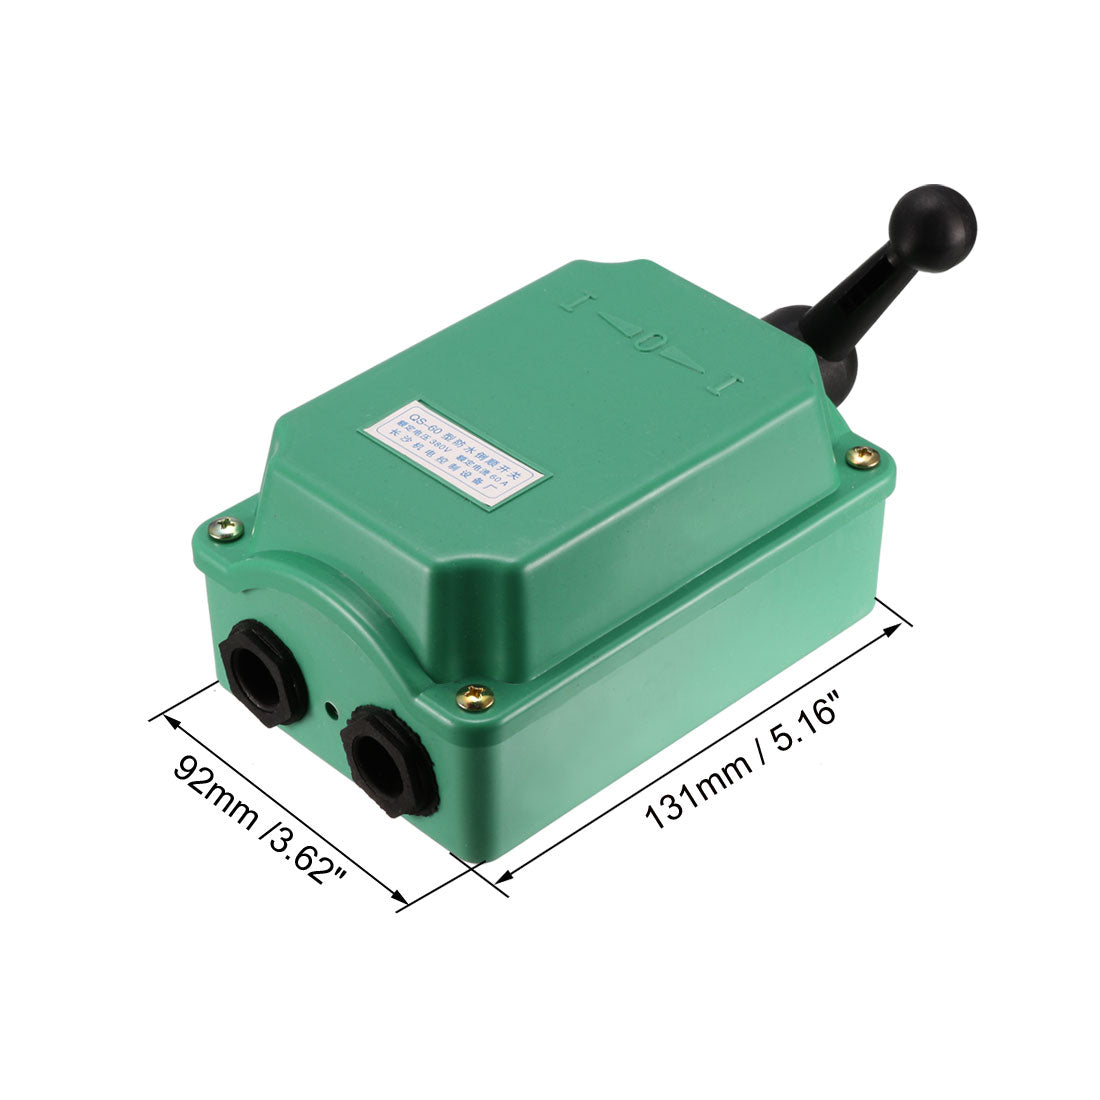 uxcell Uxcell Drum Switch QS-60 3 Positon Forward/Off/Reverse Motor Control Plastic Shell 60A